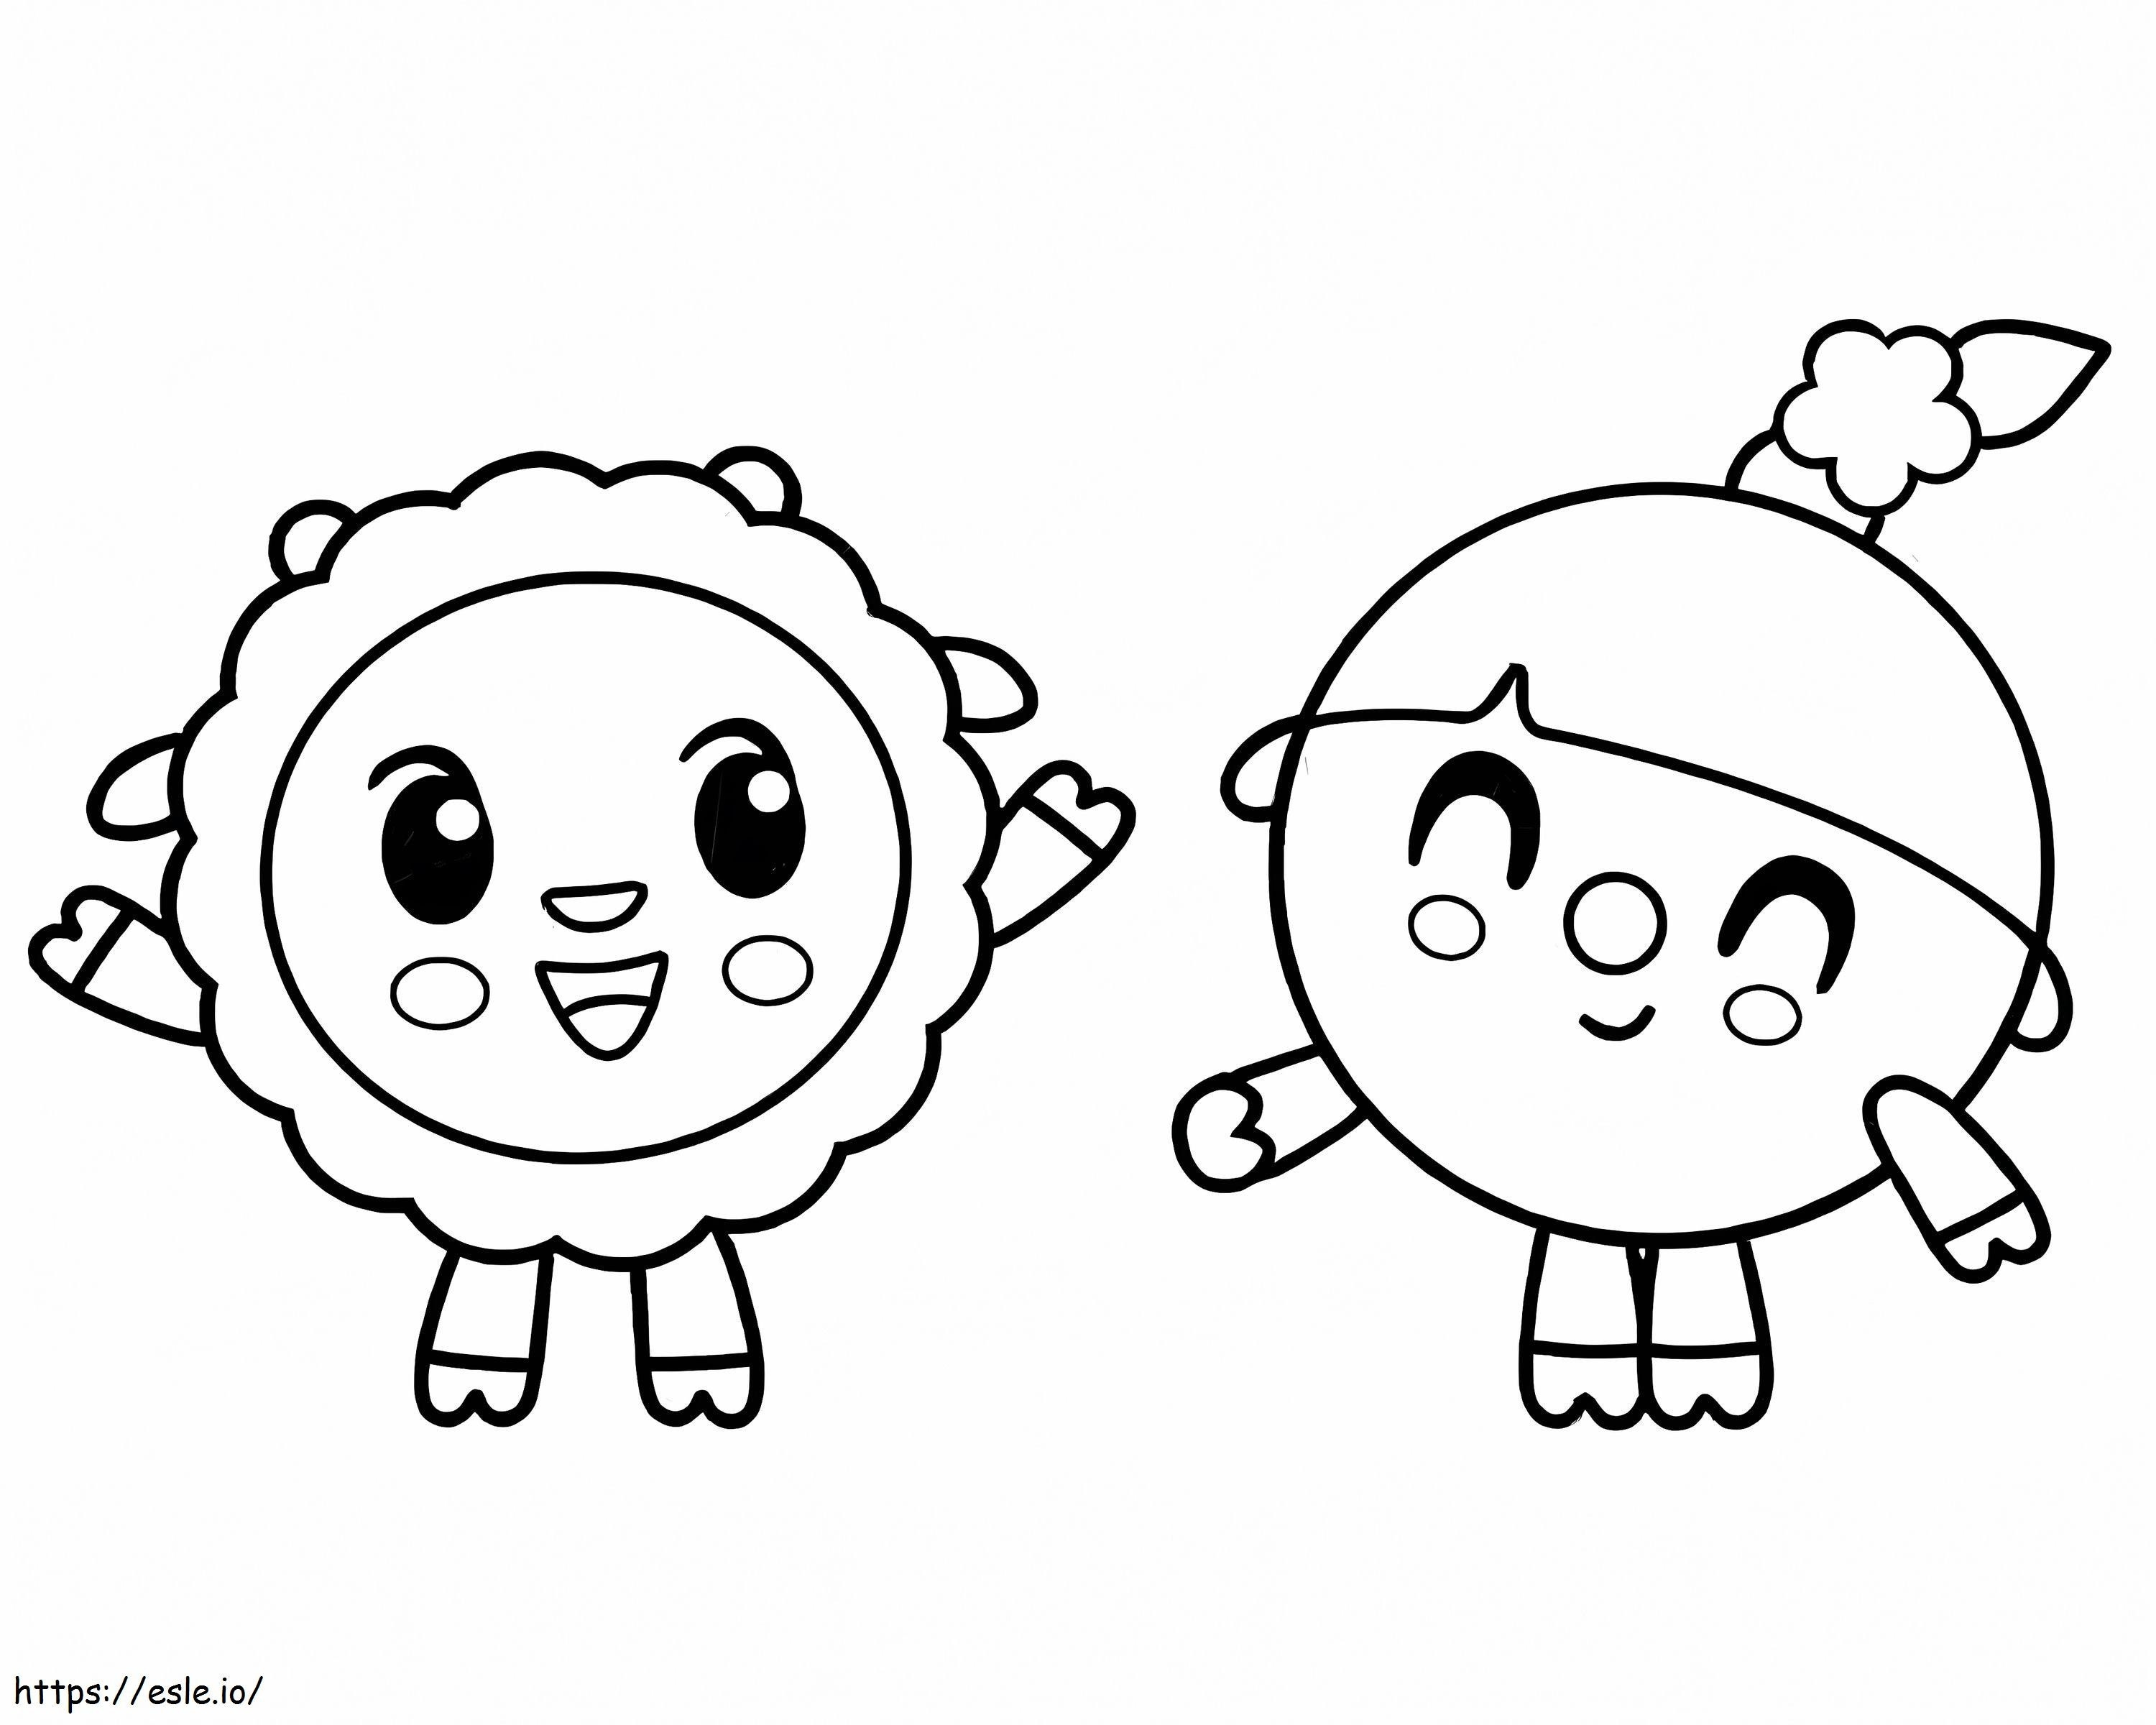 Wally And Rosy coloring page